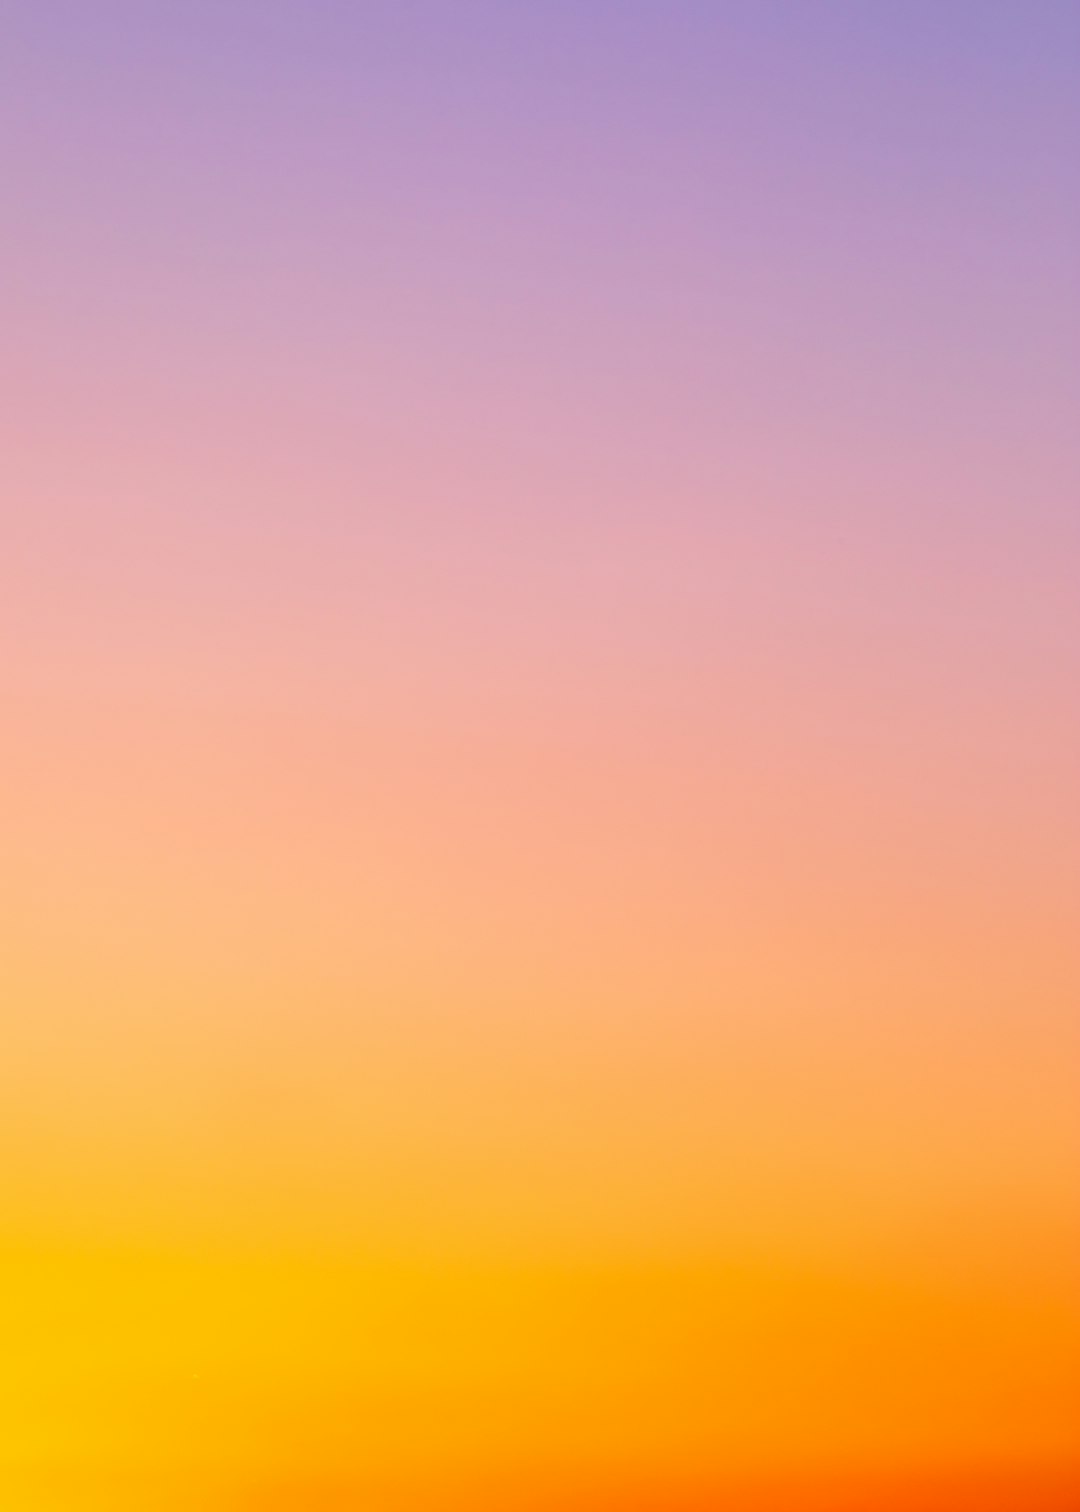 orange and yellow sky during sunset